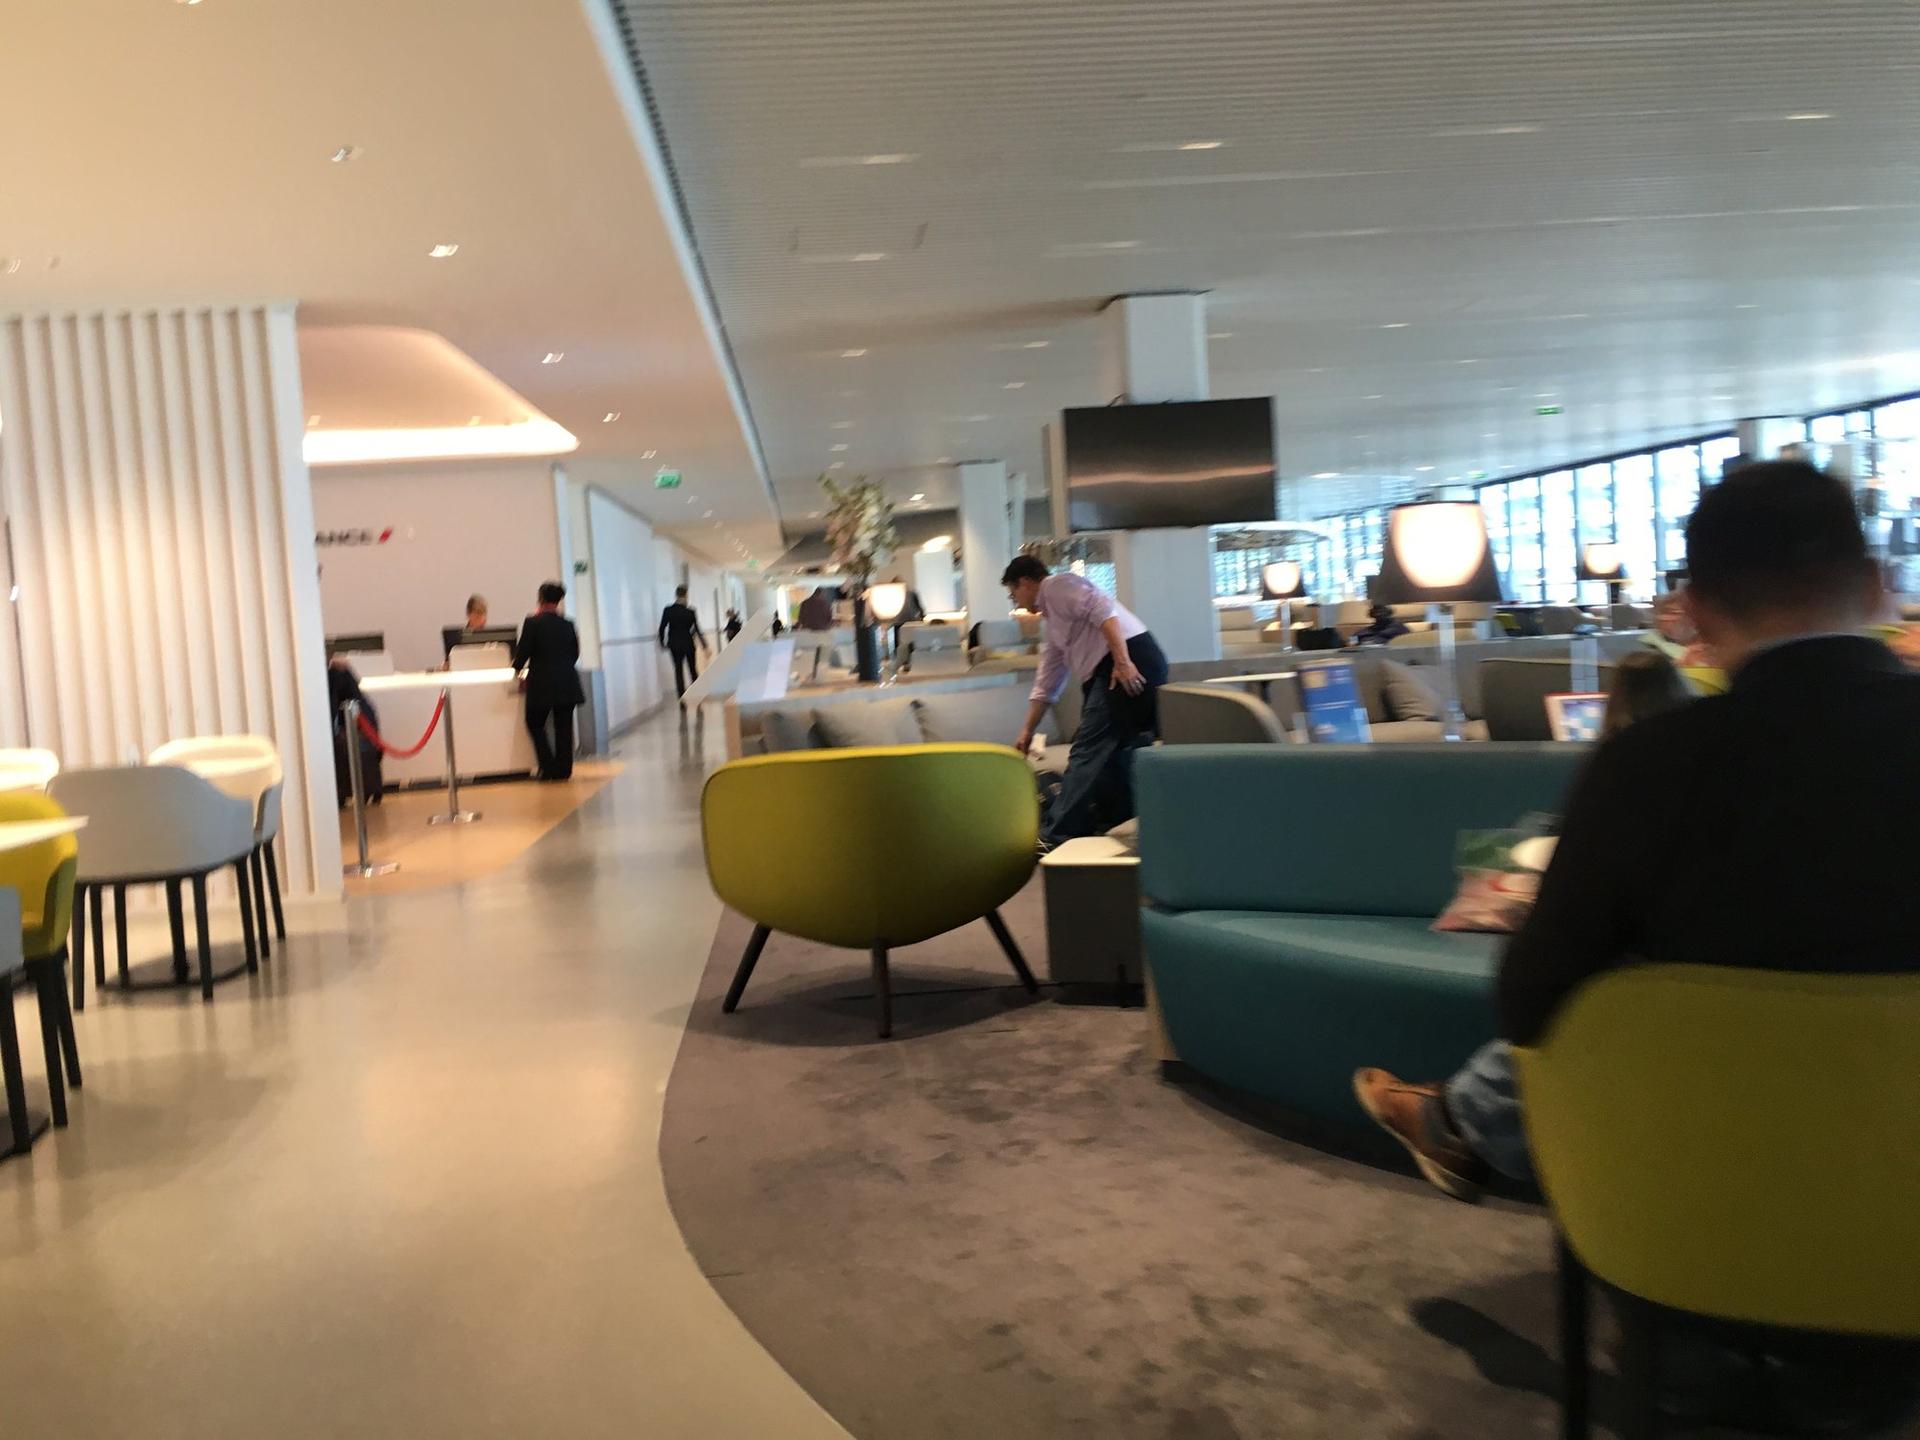 Air France Lounge (Concourse L) image 41 of 57